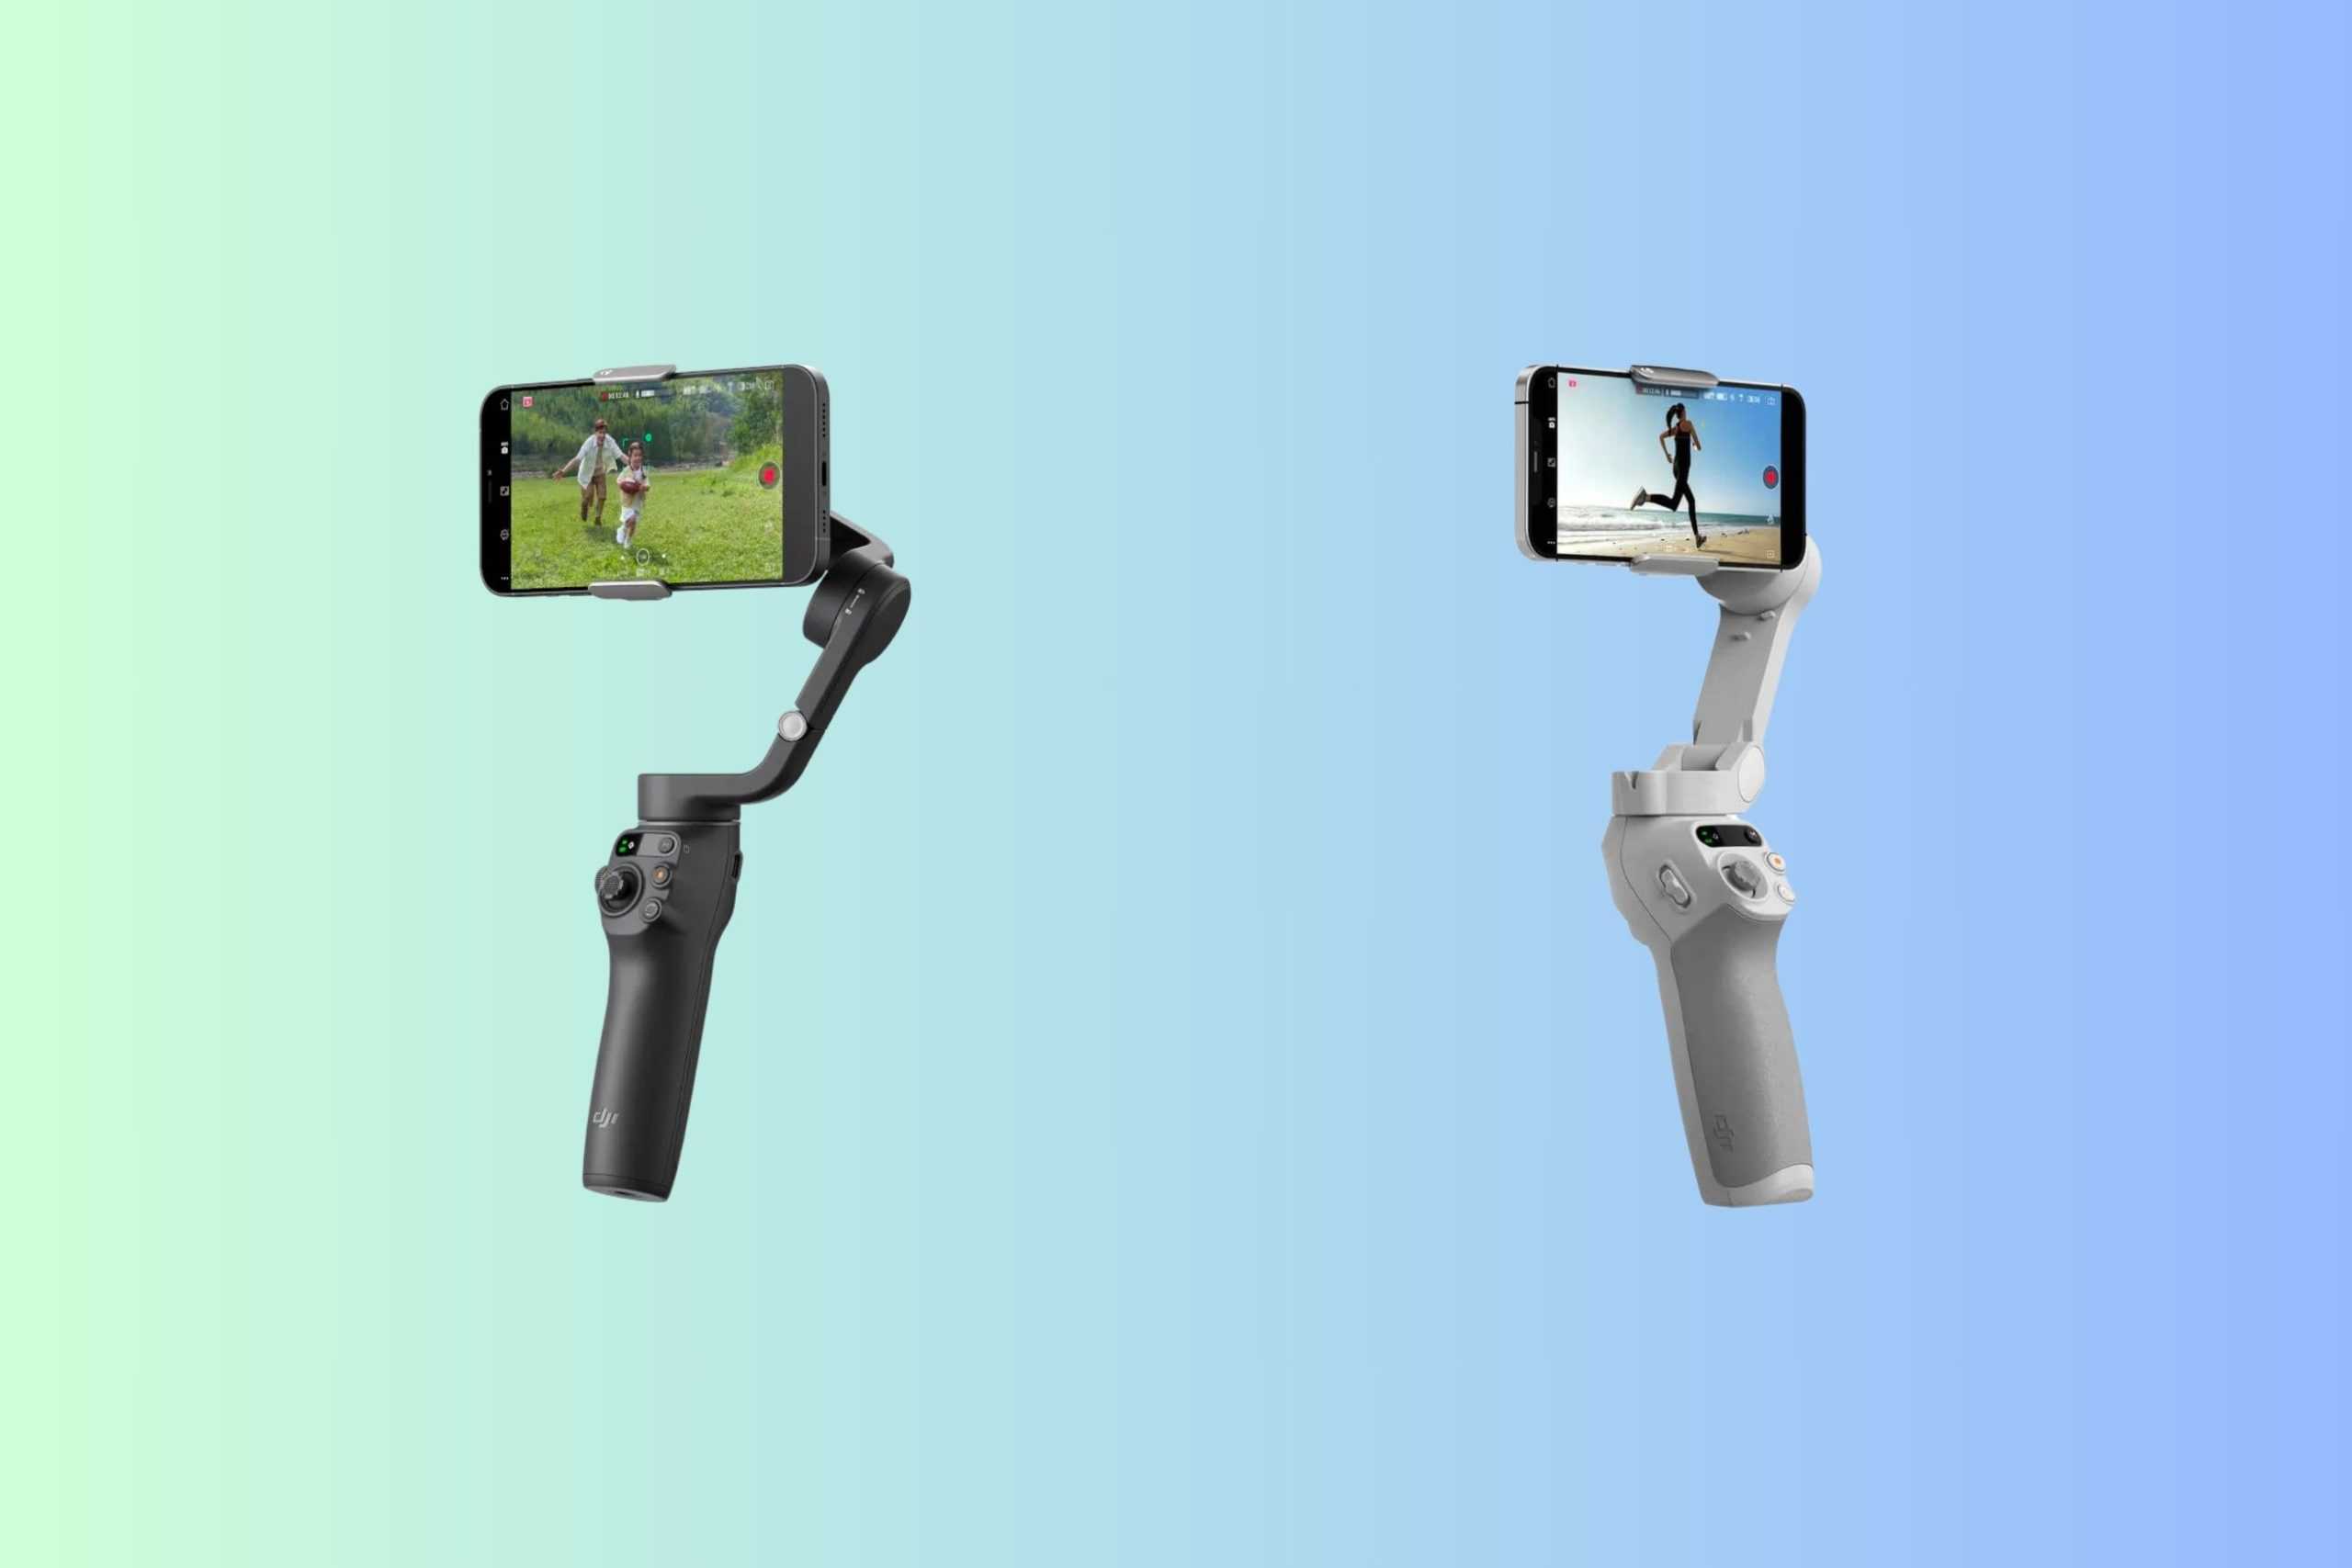 dji osmo mobile 6 and dji osmo mobile se side by side